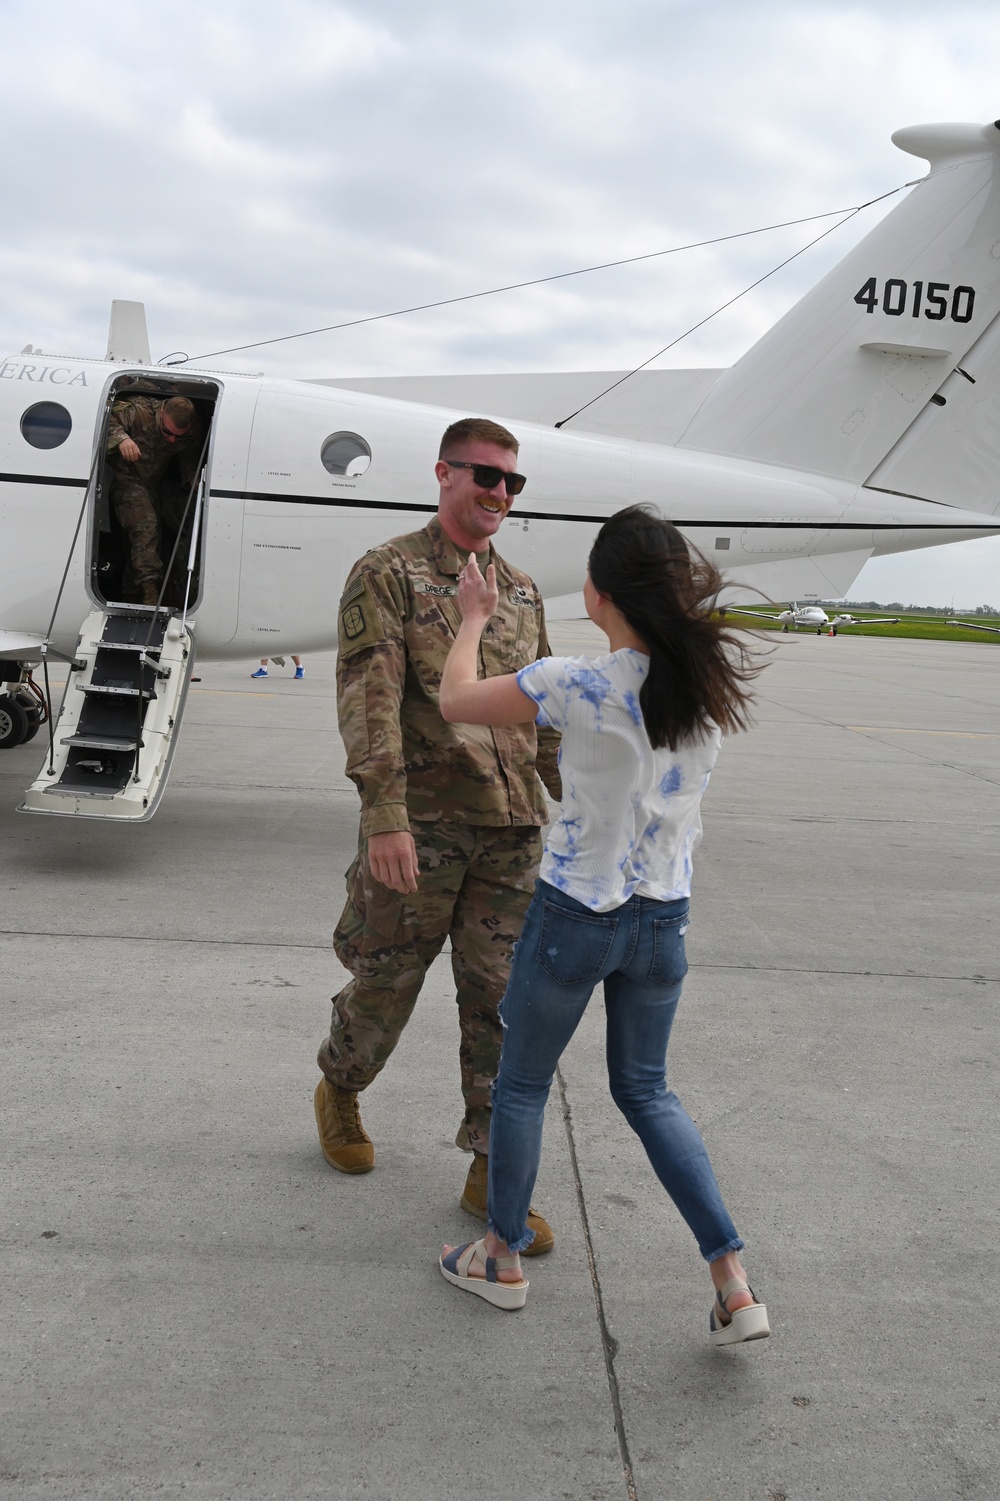 Sgt. Casey Drege returns to Fargo after deployment to southwest Asia